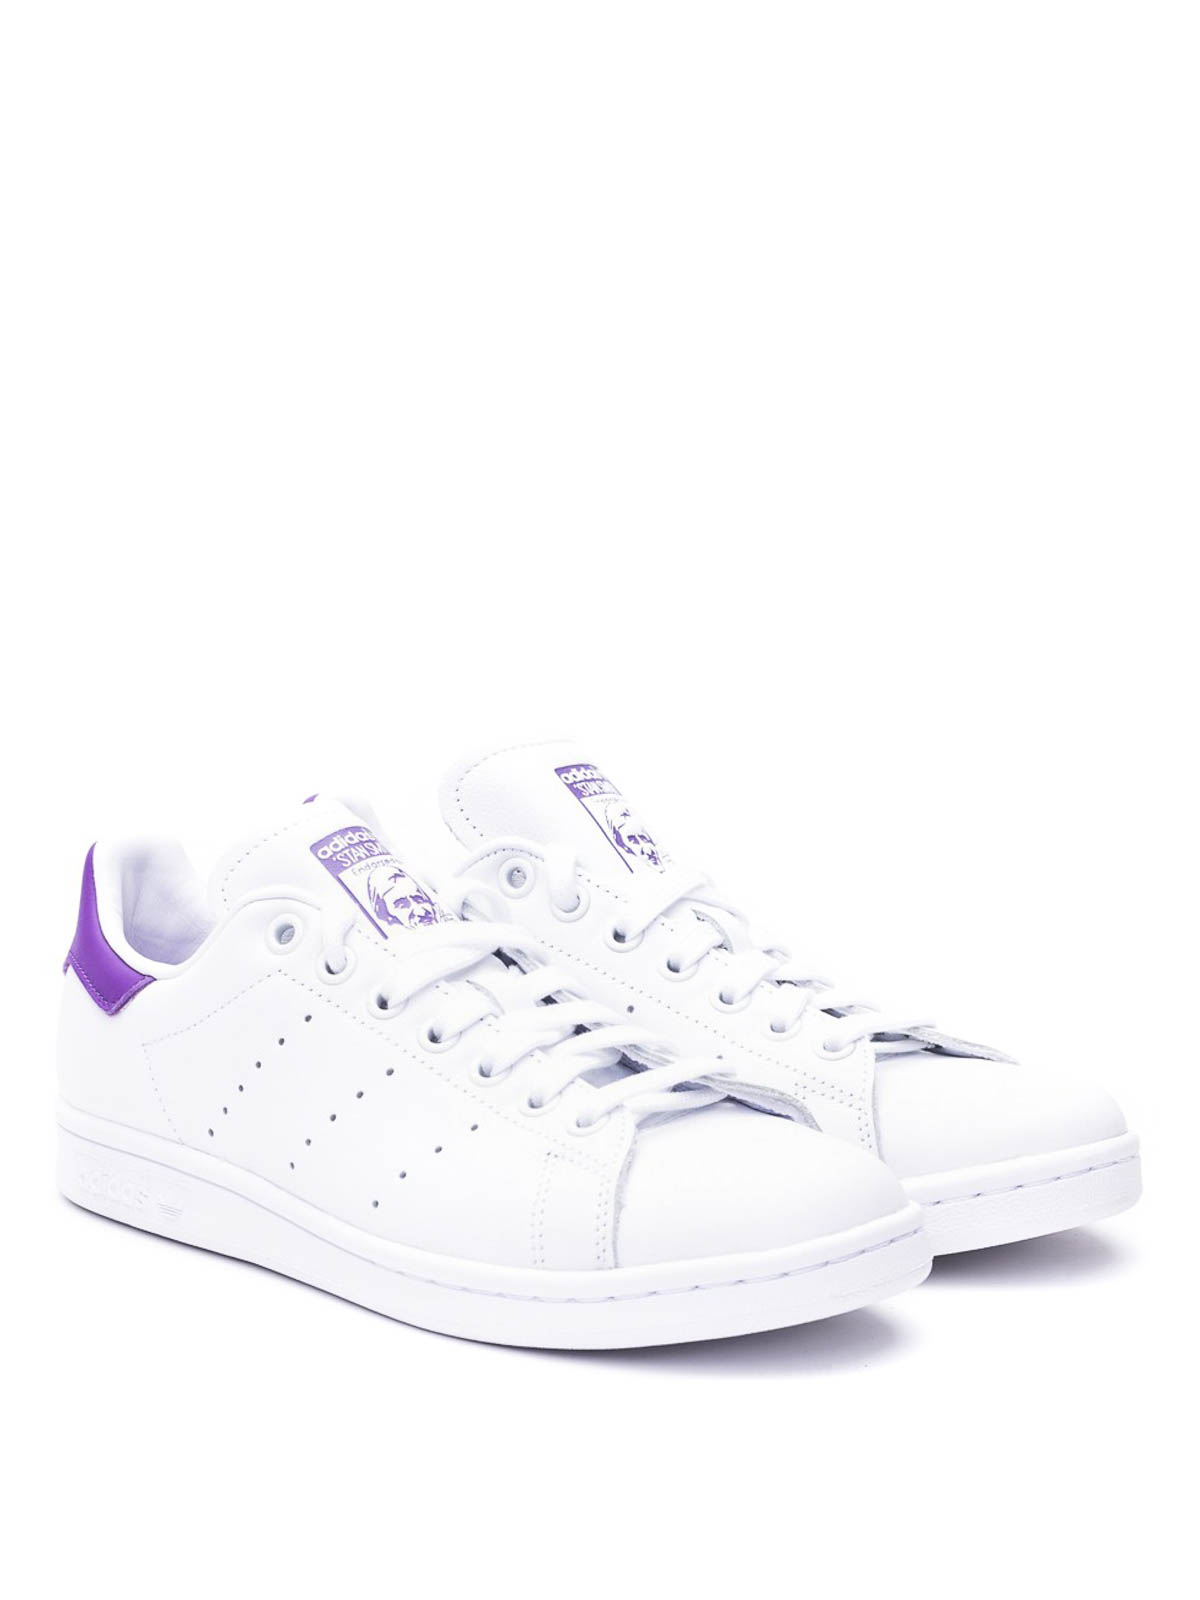 Adidas - Sneakers Stan Smith bianche e viola - sneakers - EE5864WH